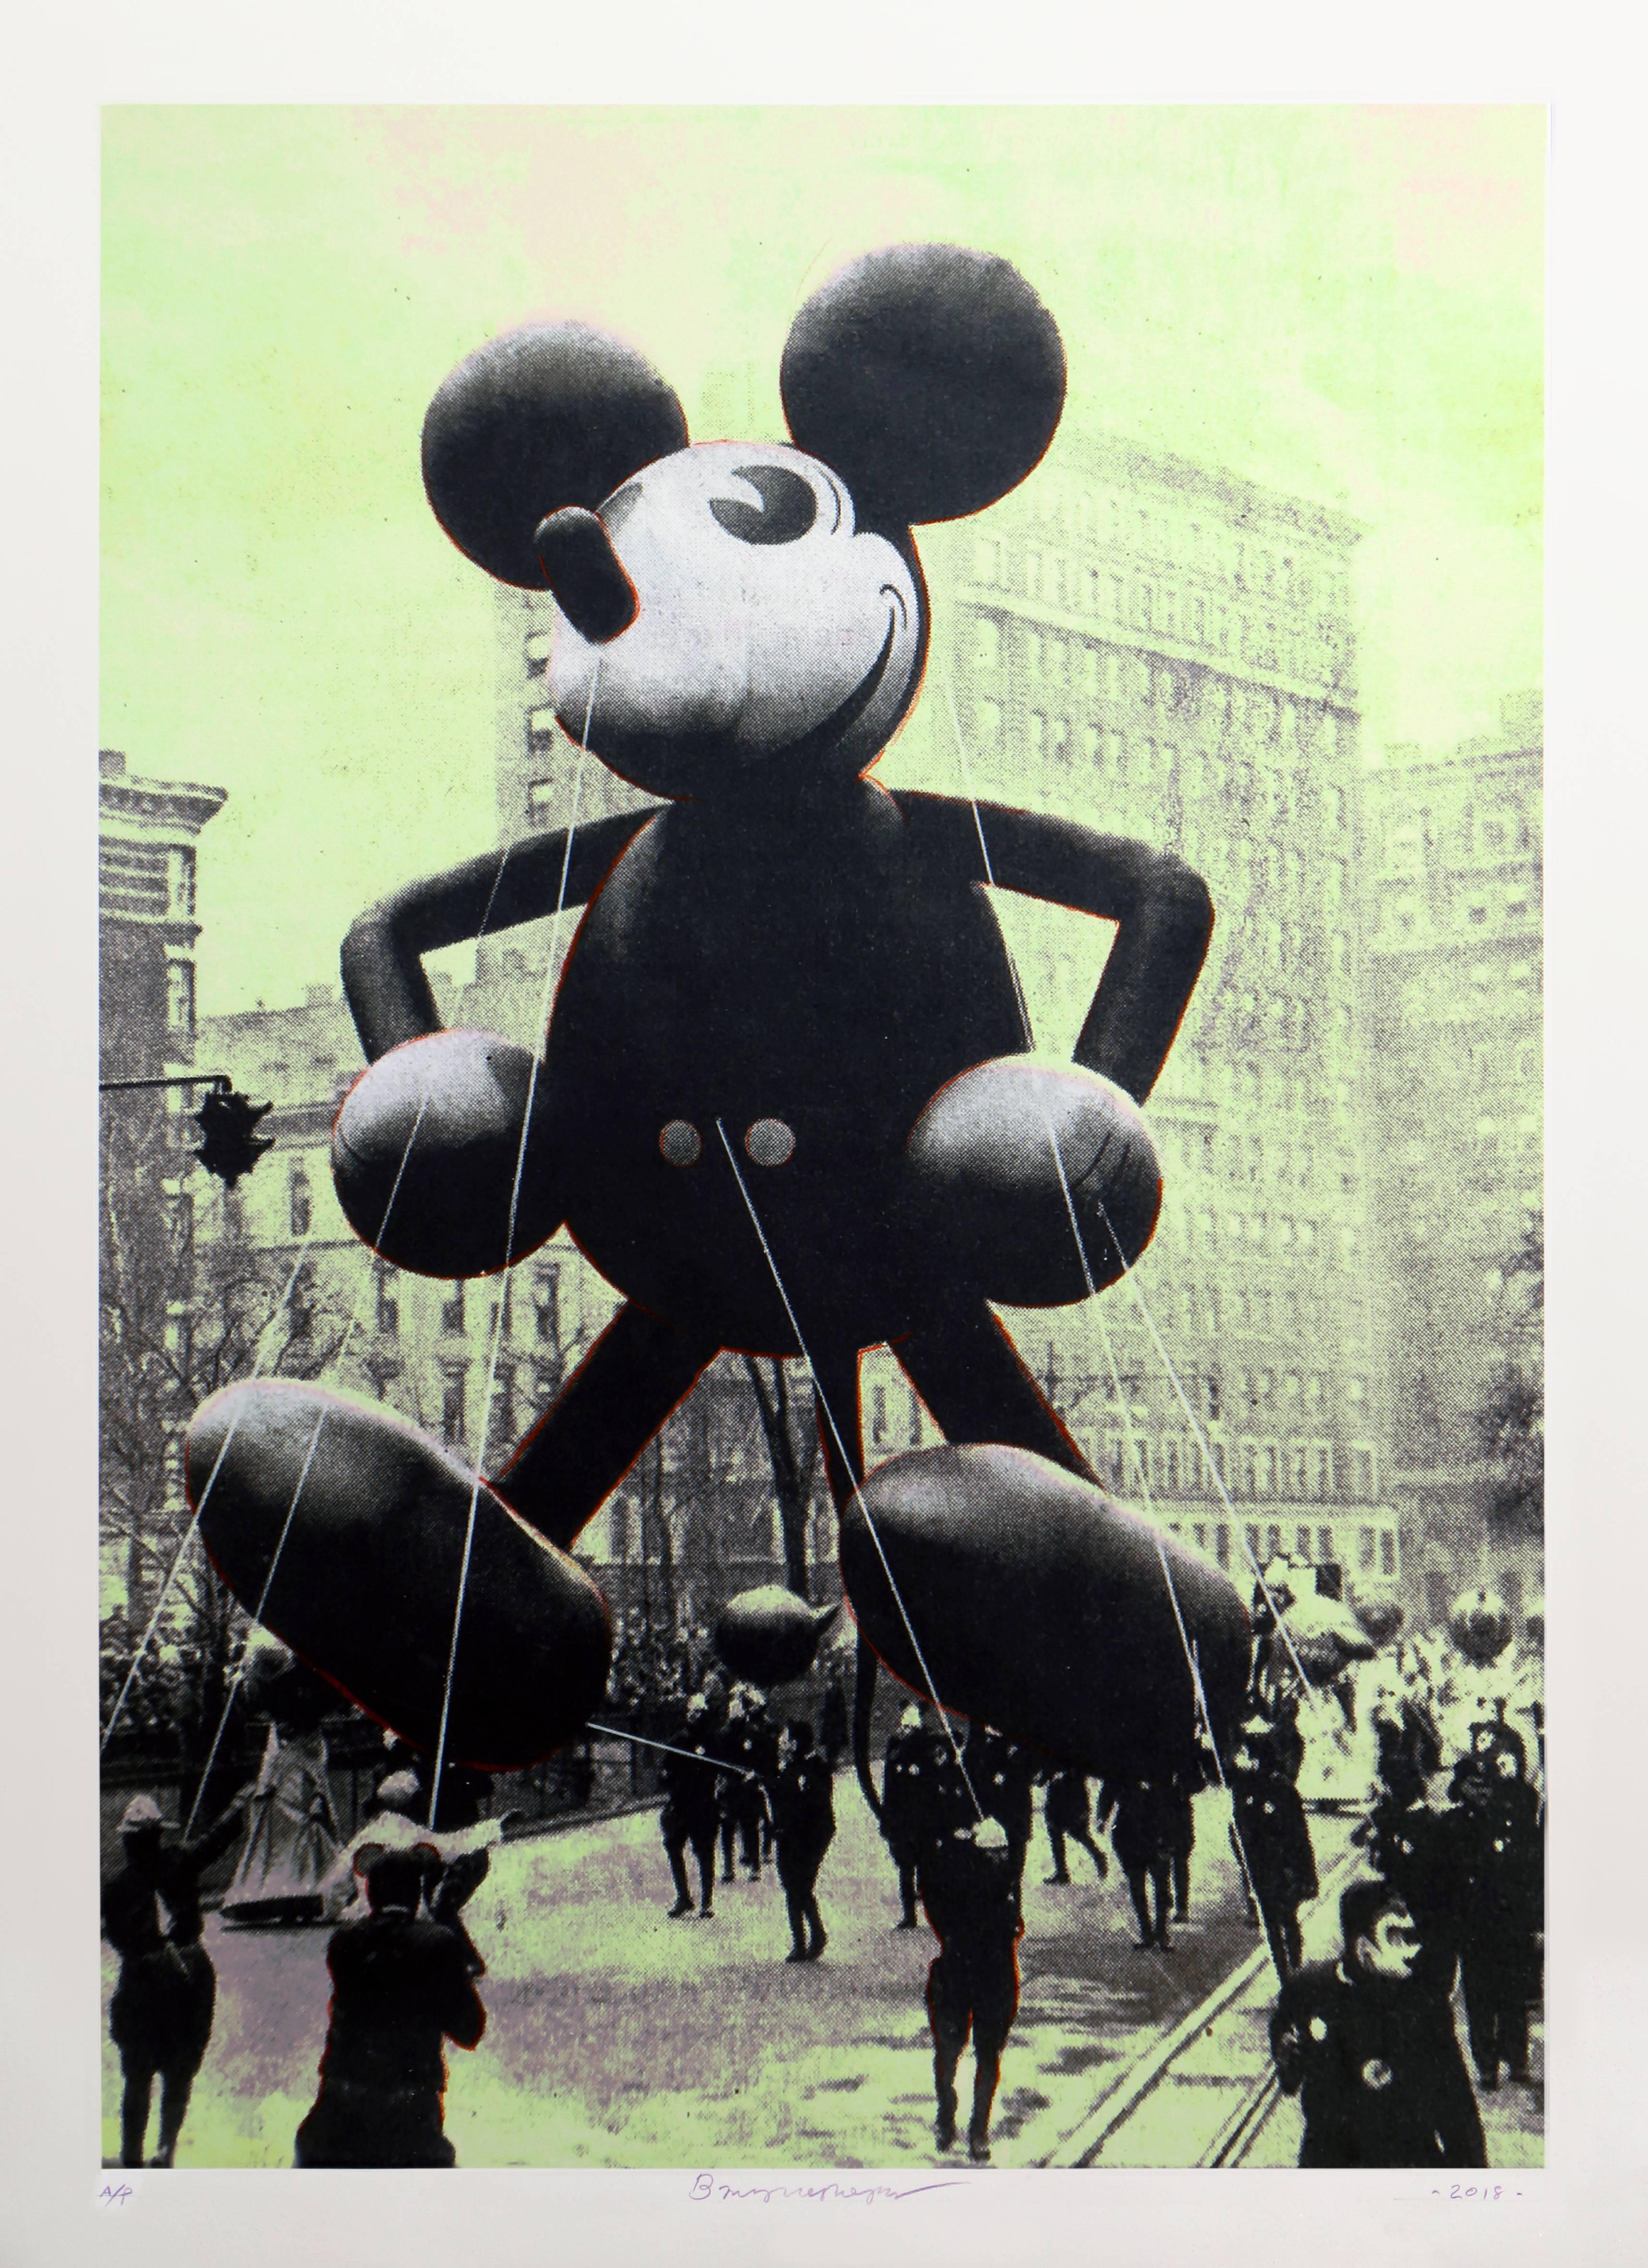 Macy's Mickey Mouse (Ltd Ed. of 10, Hand-embellished Print, Contemporary, Green) - Mixed Media Art by Bruce Helander